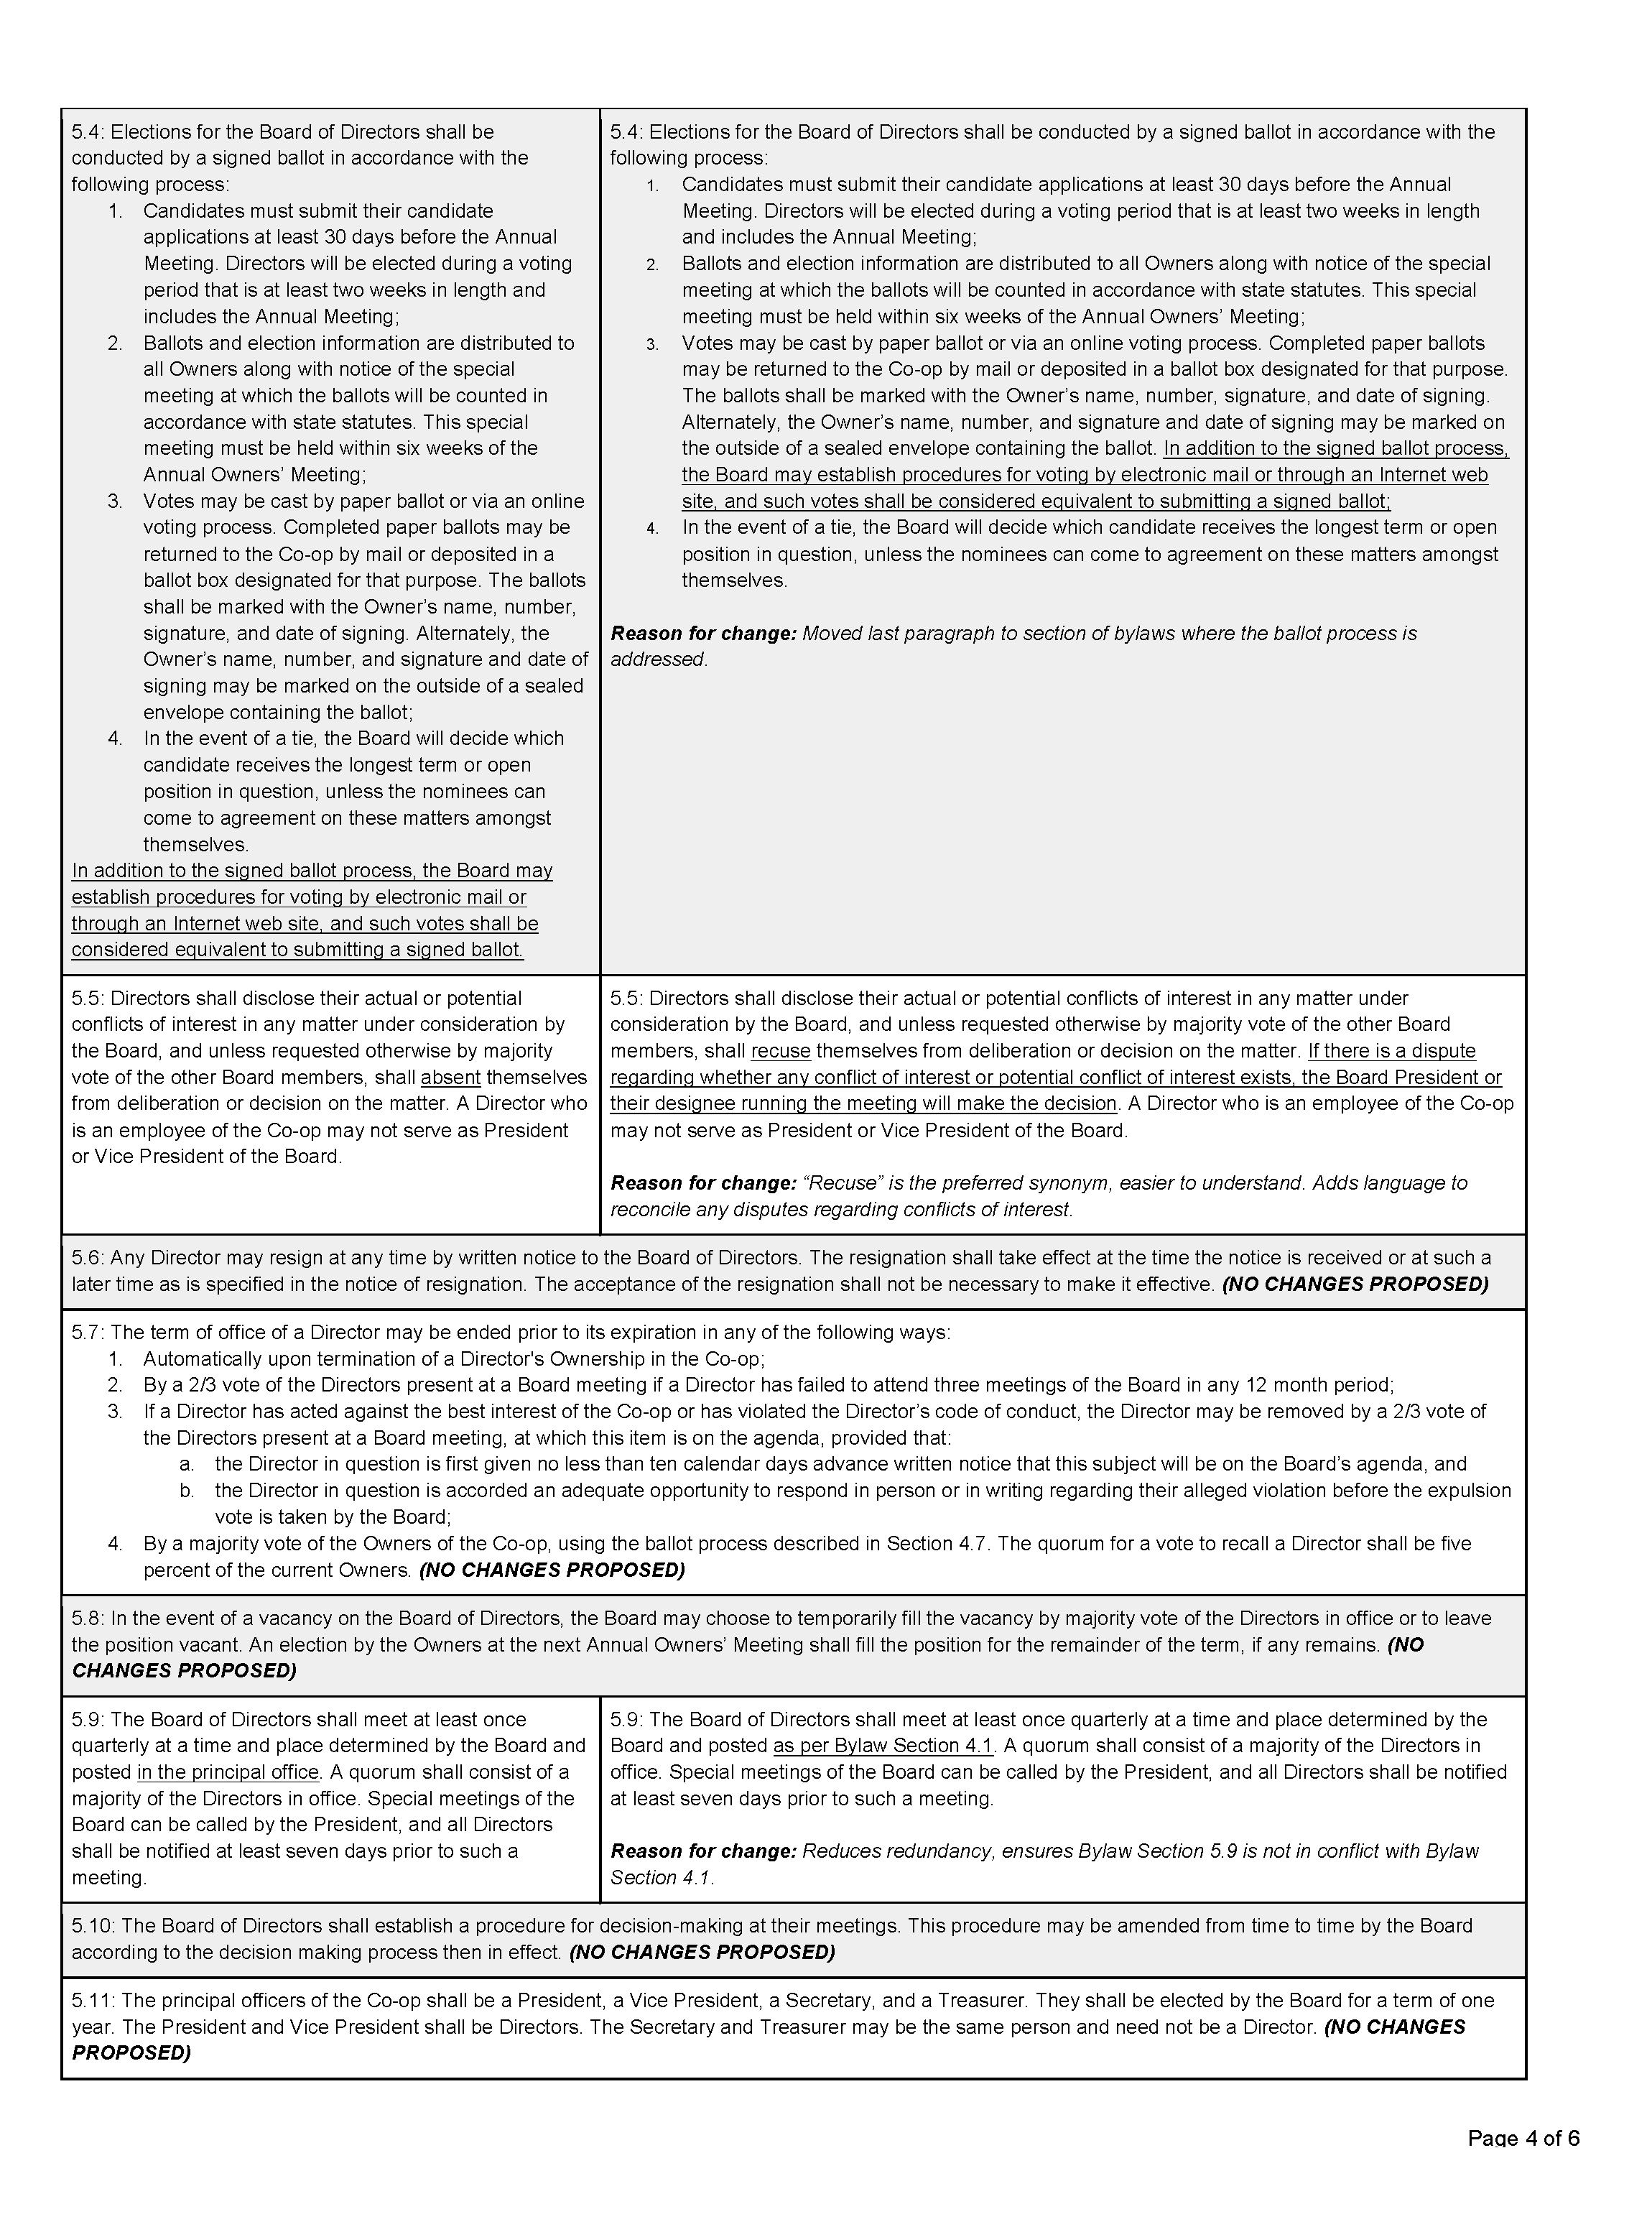 2020 Bylaws Review for Ballot Consideration Page 5